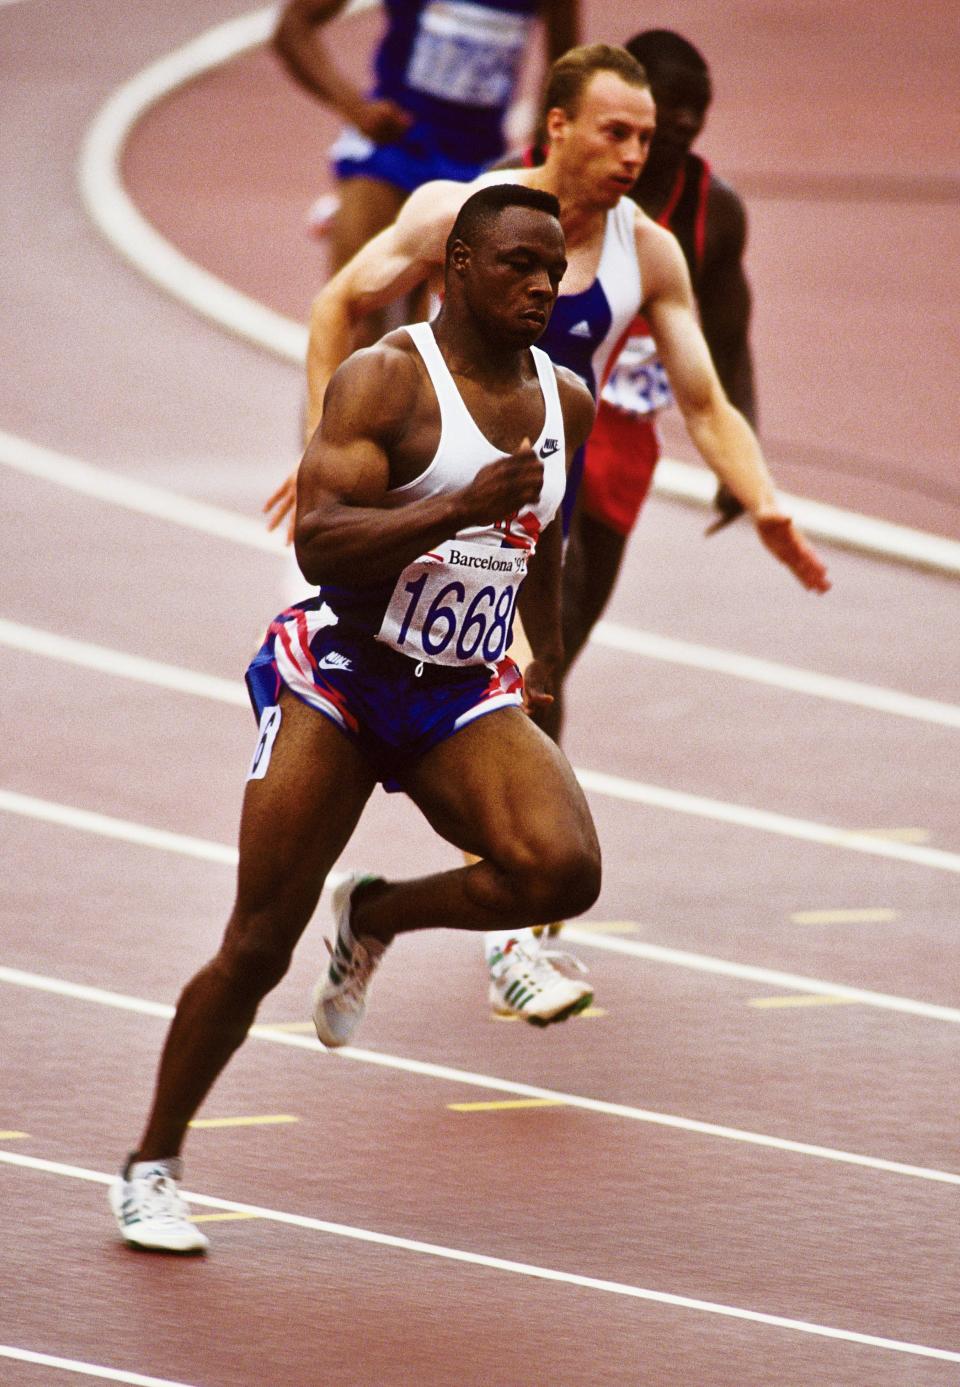 Michael Bates won a bronze medal in the men's 200-meter at the 1992 Barcelona Games. Bates went on to a 10-year NFL career.